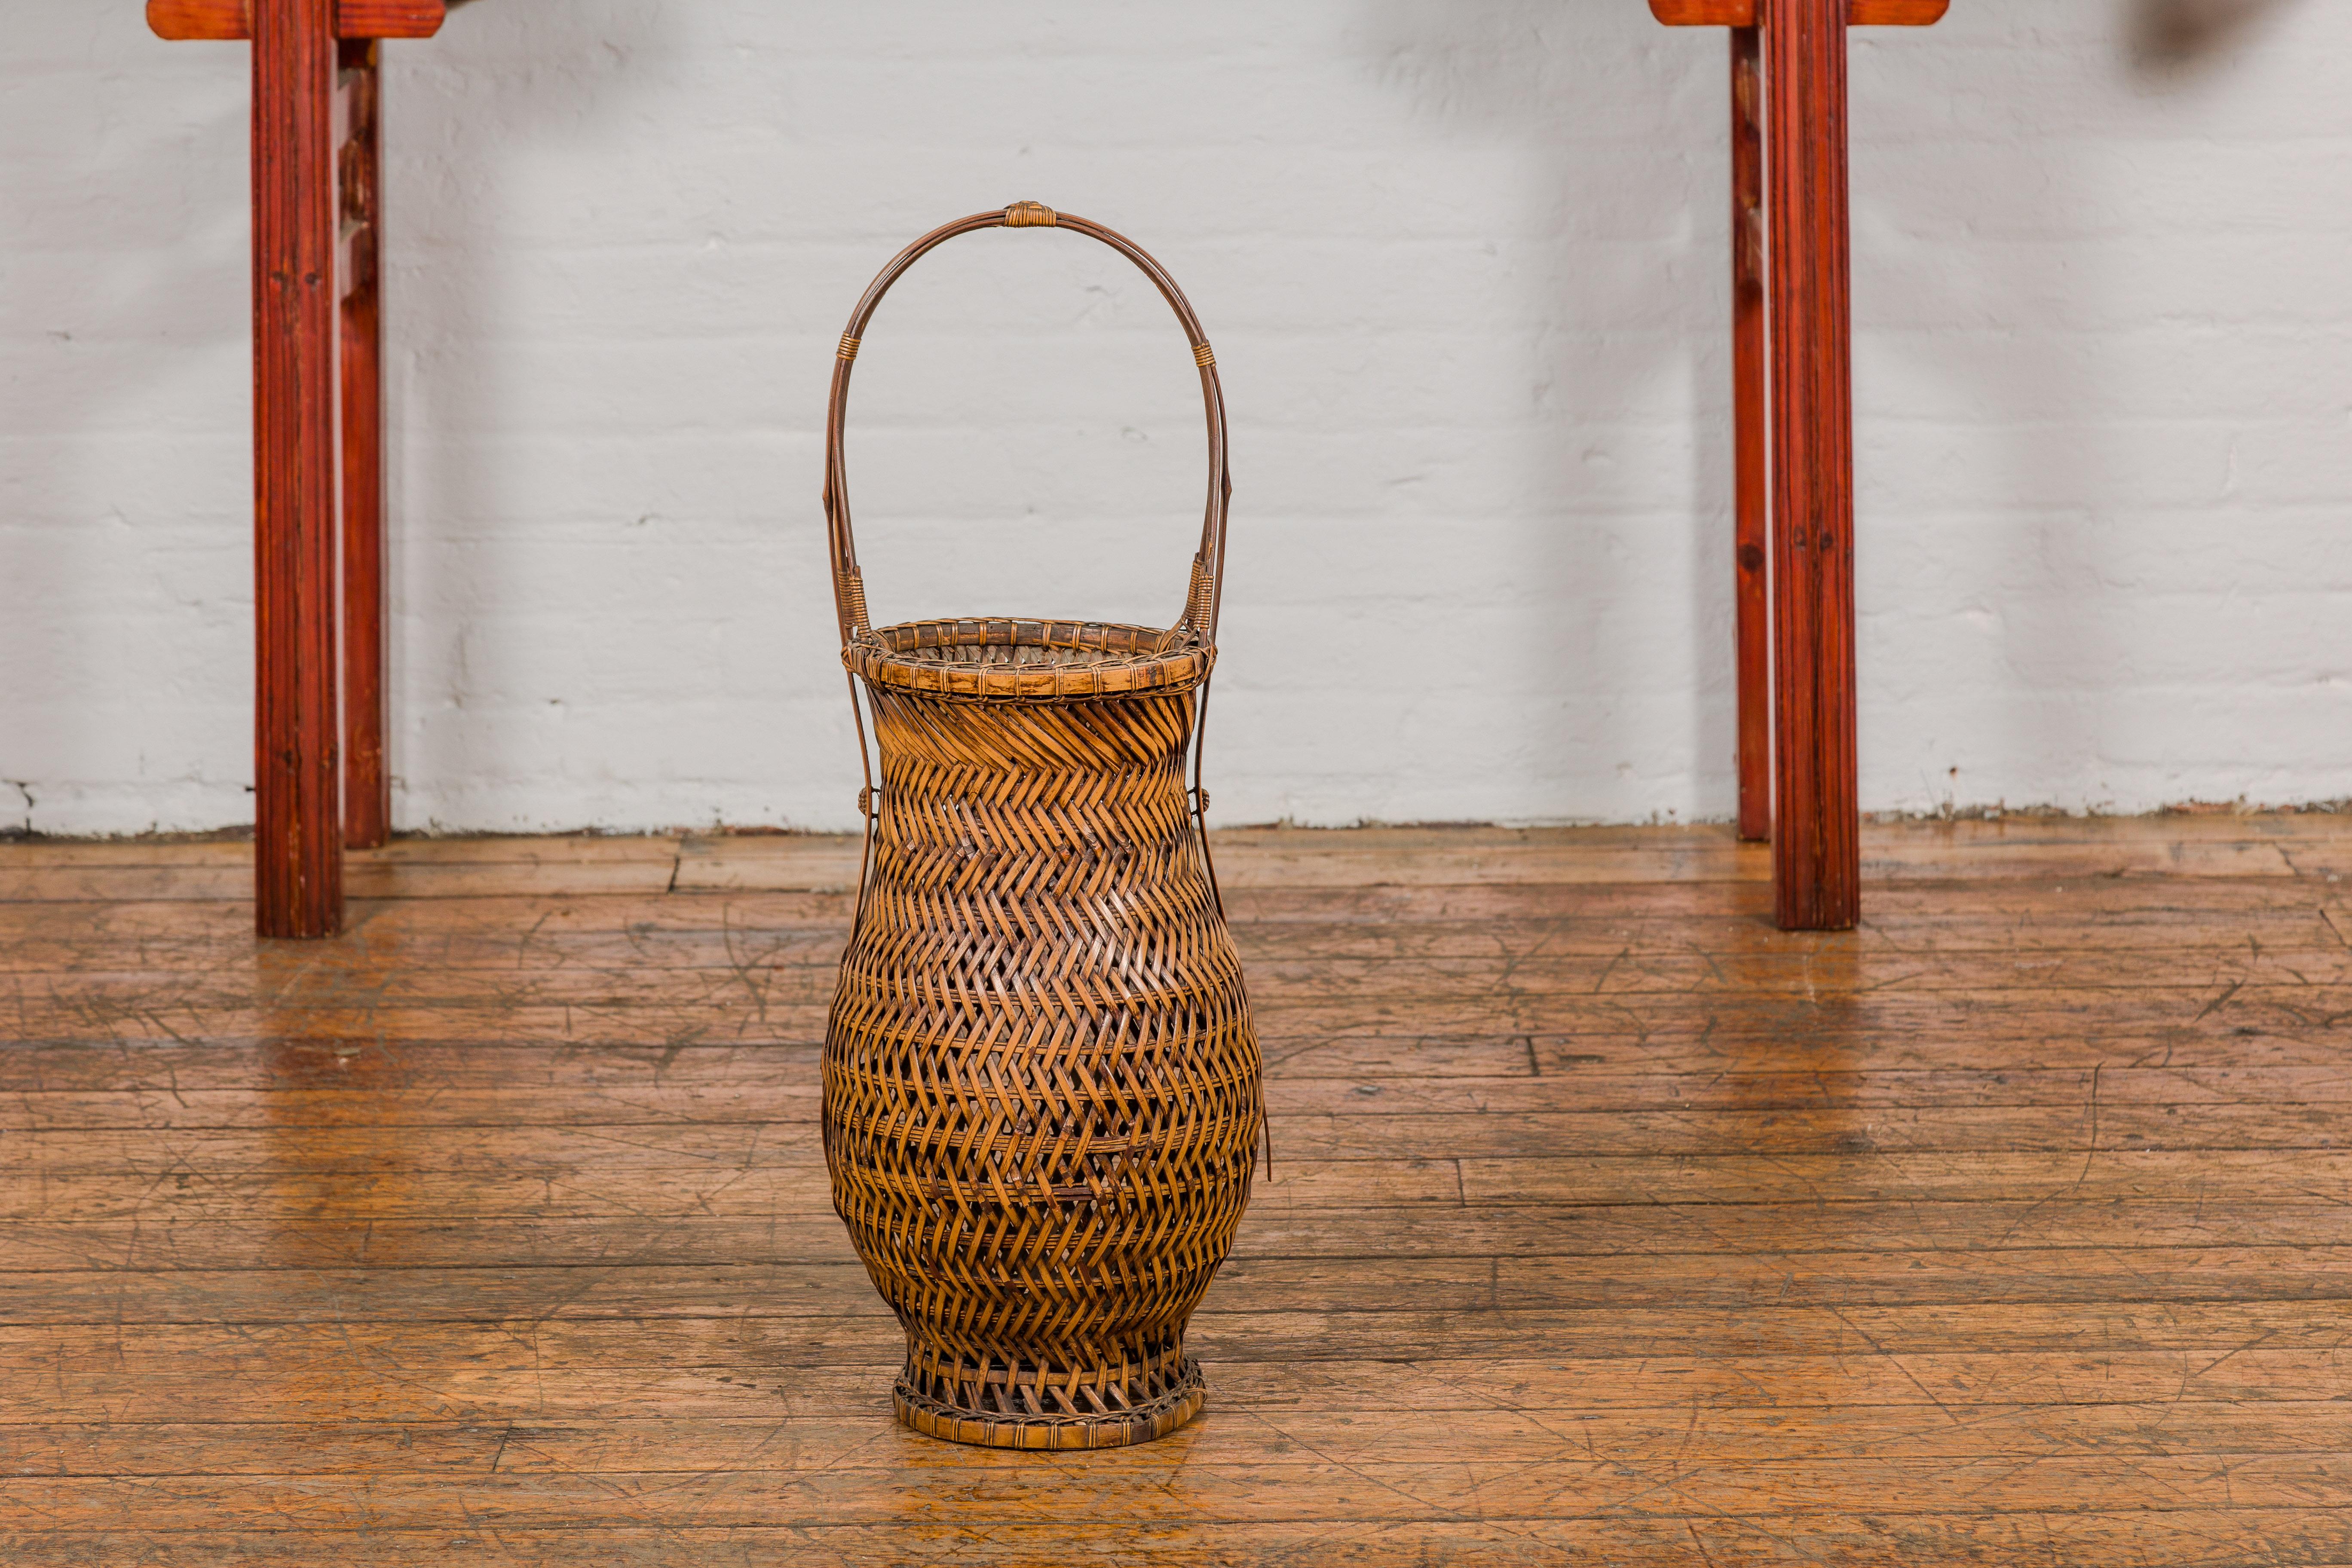 Antique Japanese Woven Bamboo Ikebana Basket with Large Handle, circa 1900 In Good Condition For Sale In Yonkers, NY